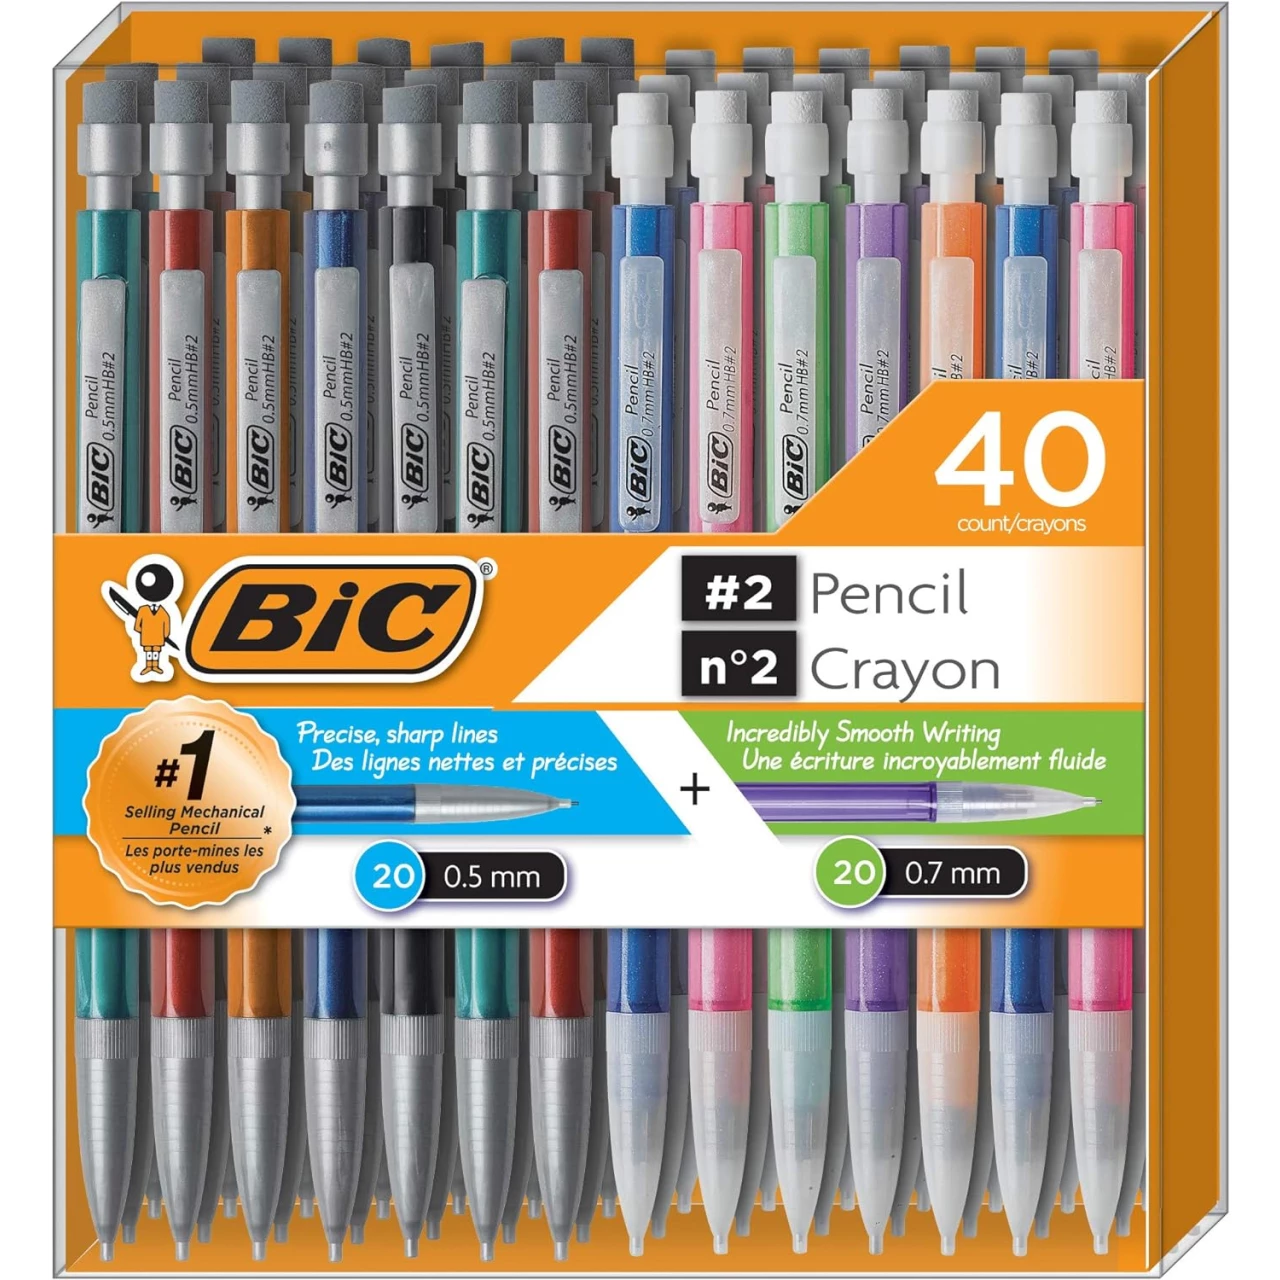 BIC Mechanical Pencil #2 EXTRA SMOOTH, Variety Bulk Pack Of 40